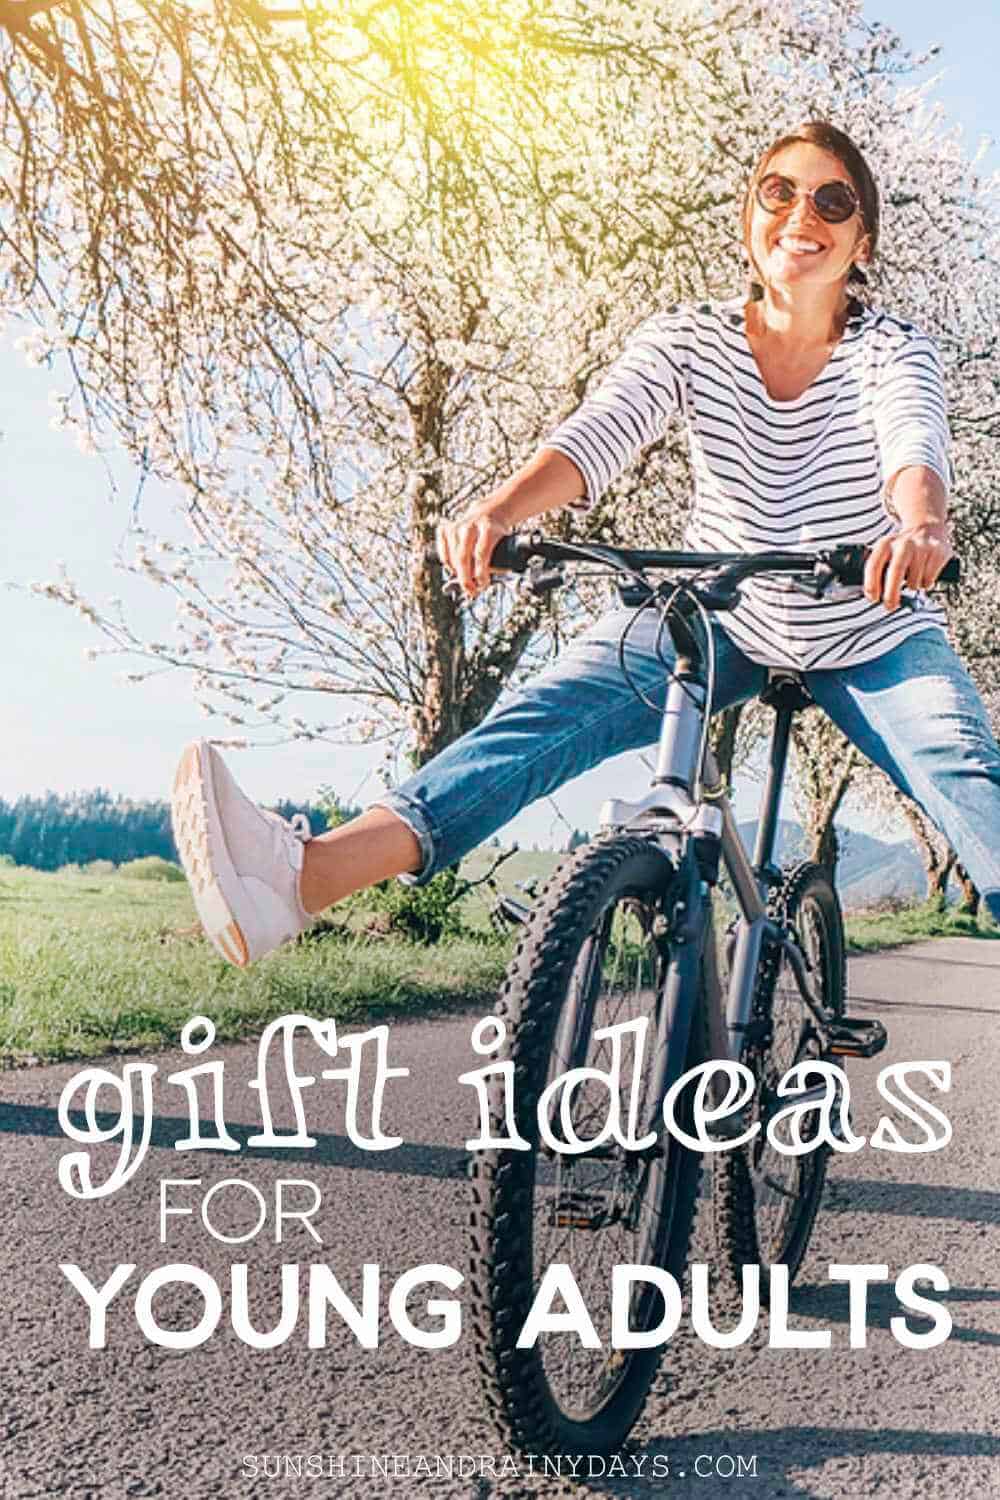 Gift Ideas For A 17 Year Old Girl - Sunshine and Rainy Days